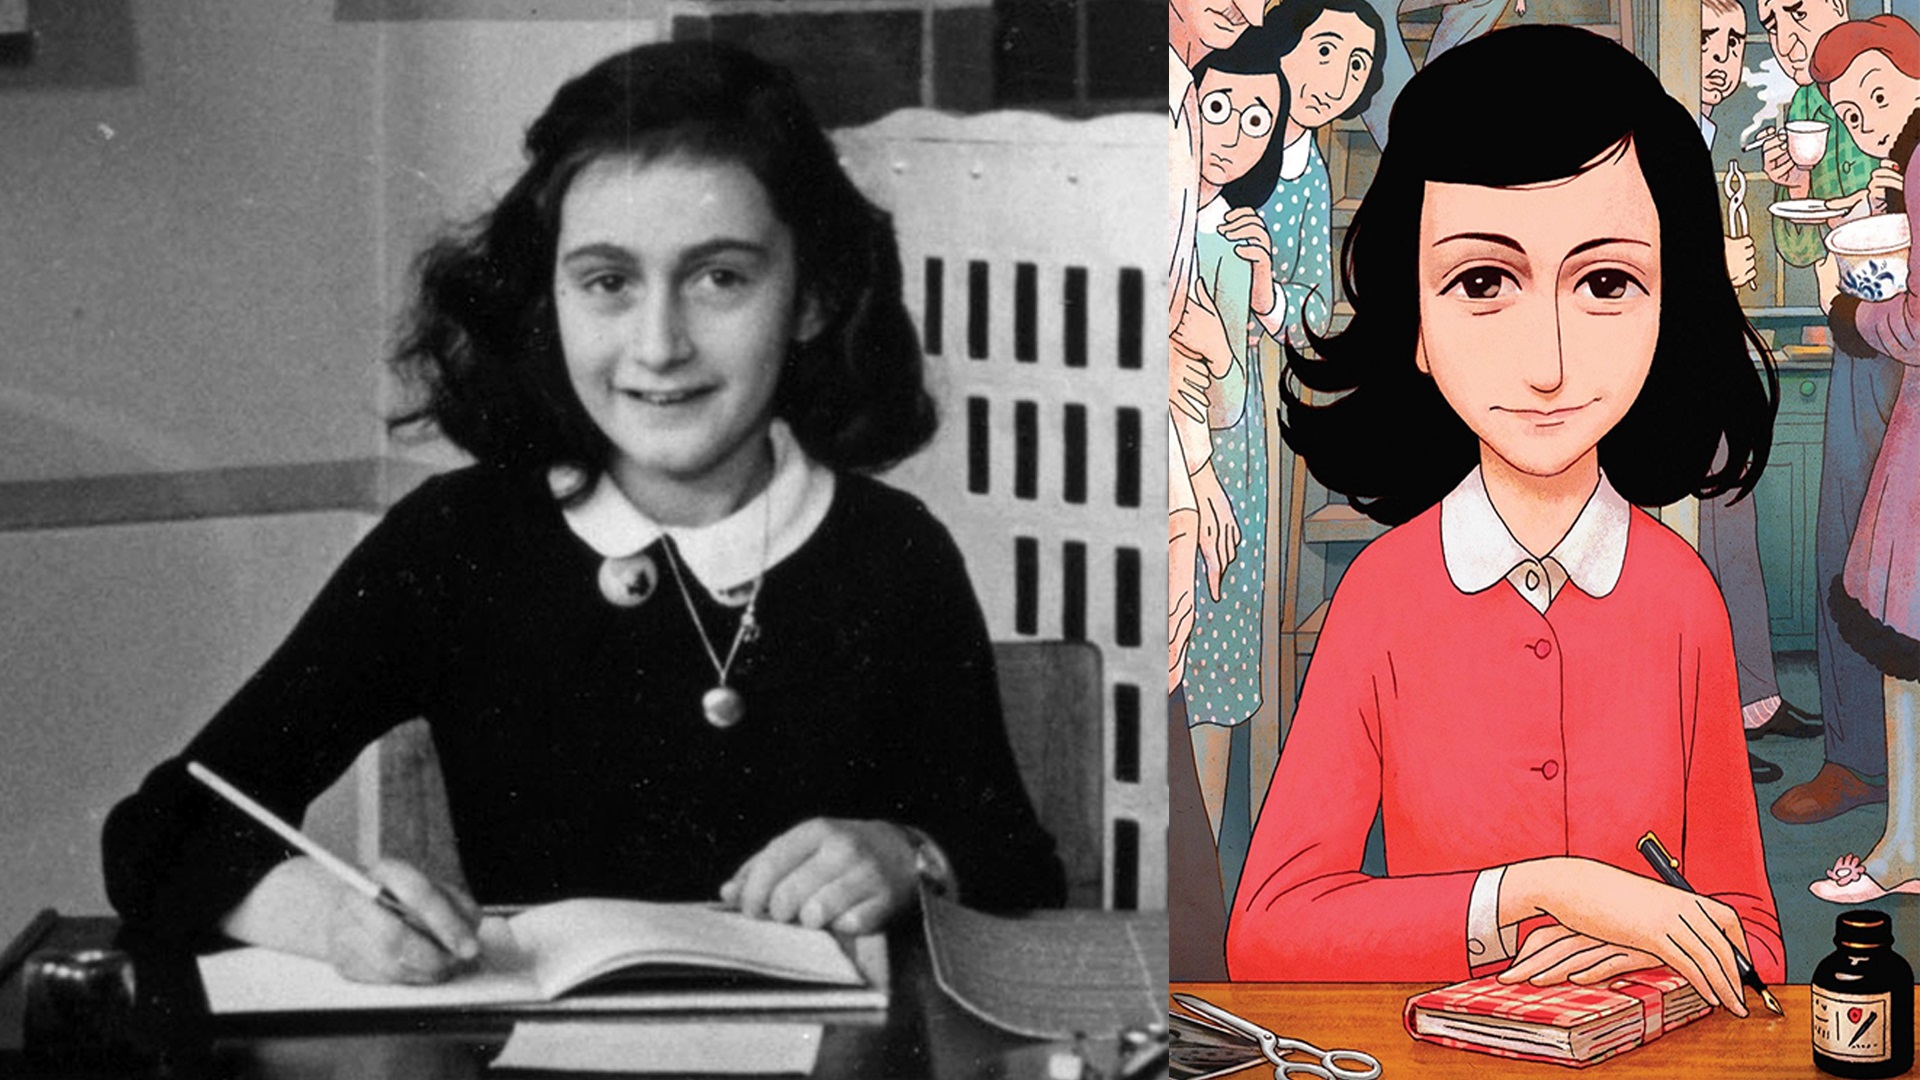 Anne Frank's diary gets lavish saucy treatment in new vibrant graphic novel | The Times of Israel